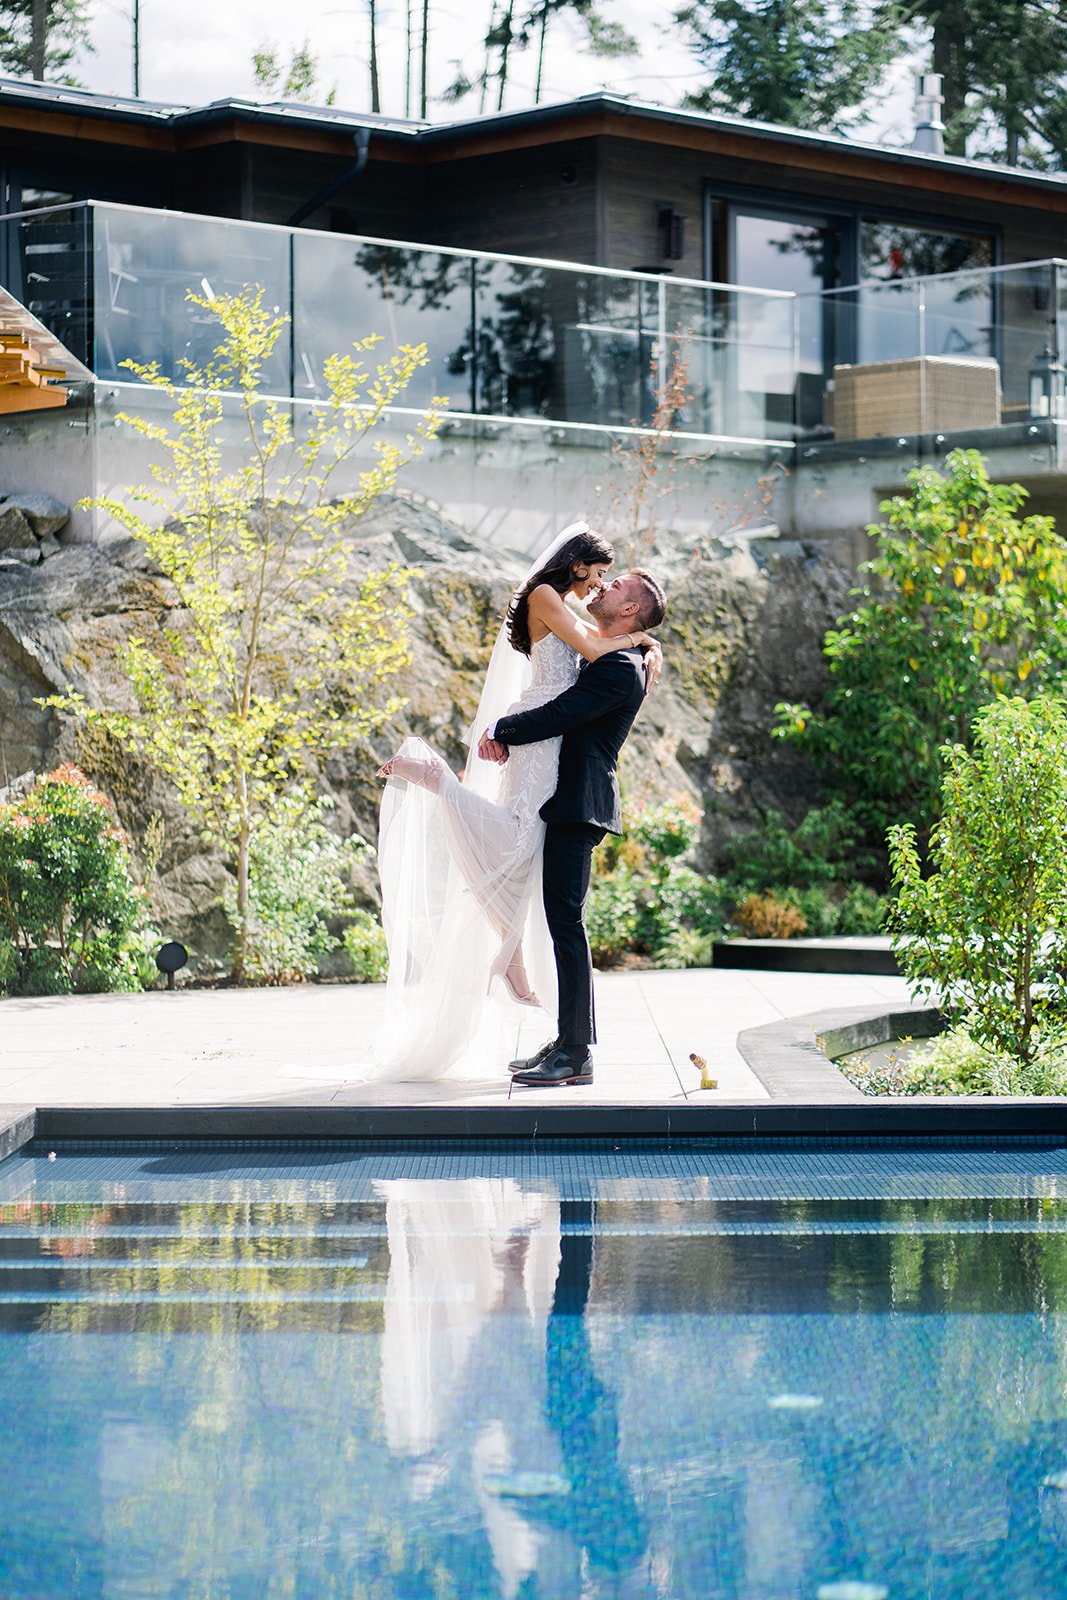 Groom lifts tiny glamorous bride in show of strength, while standing poolside in Vancouver, Canada